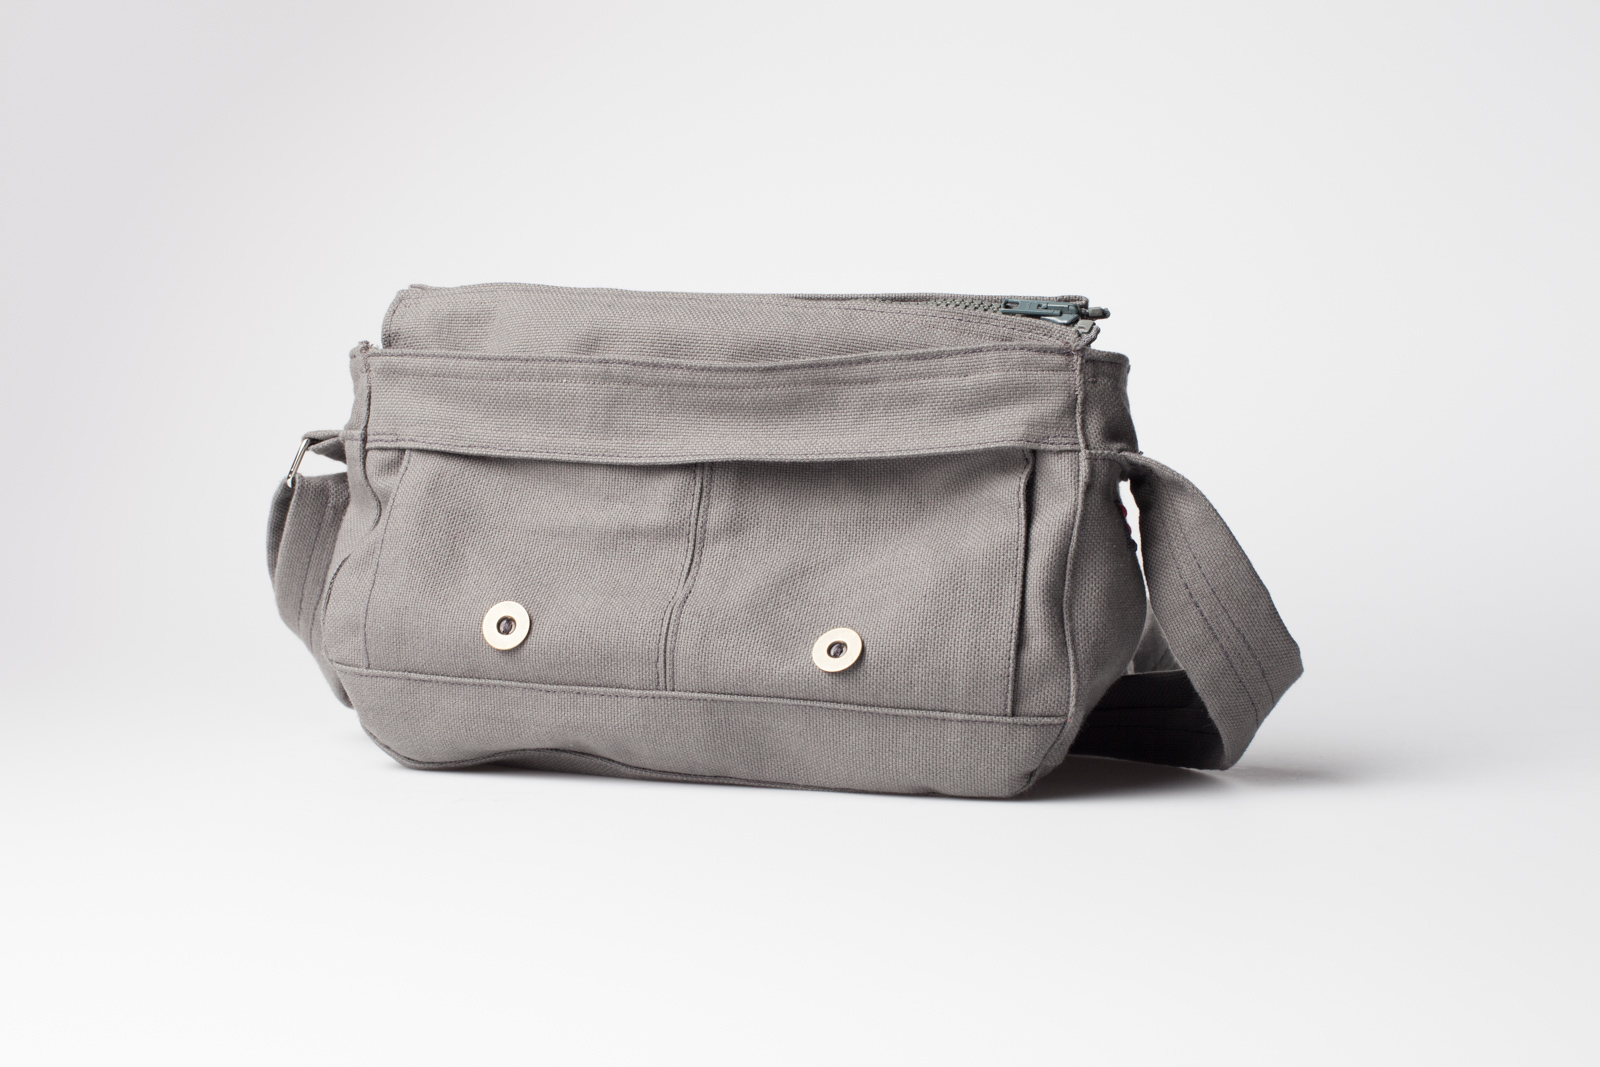 the closed grey fabric handbag with the two magnet buttons